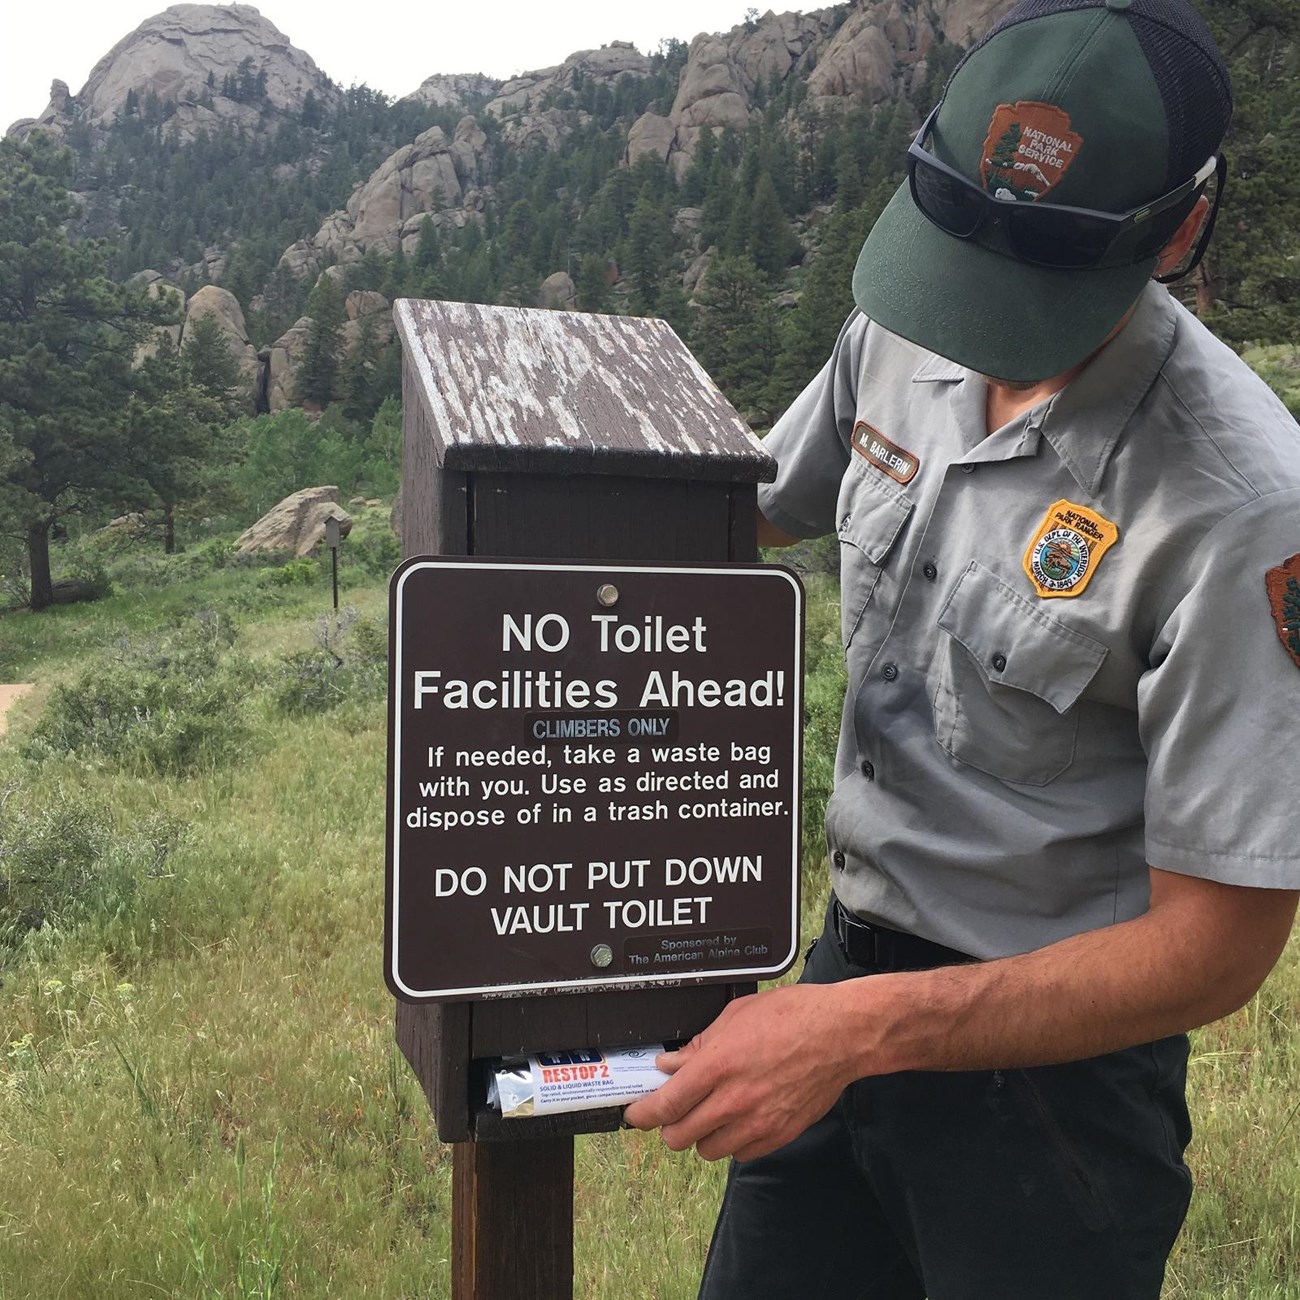 a ranger stands next to a WAG bag dispenser with sign that says "No toilet facilities ahead! If needed, take a waste bag with you. Use as directed and dispose of in trash container. Do not put down vault toilet."